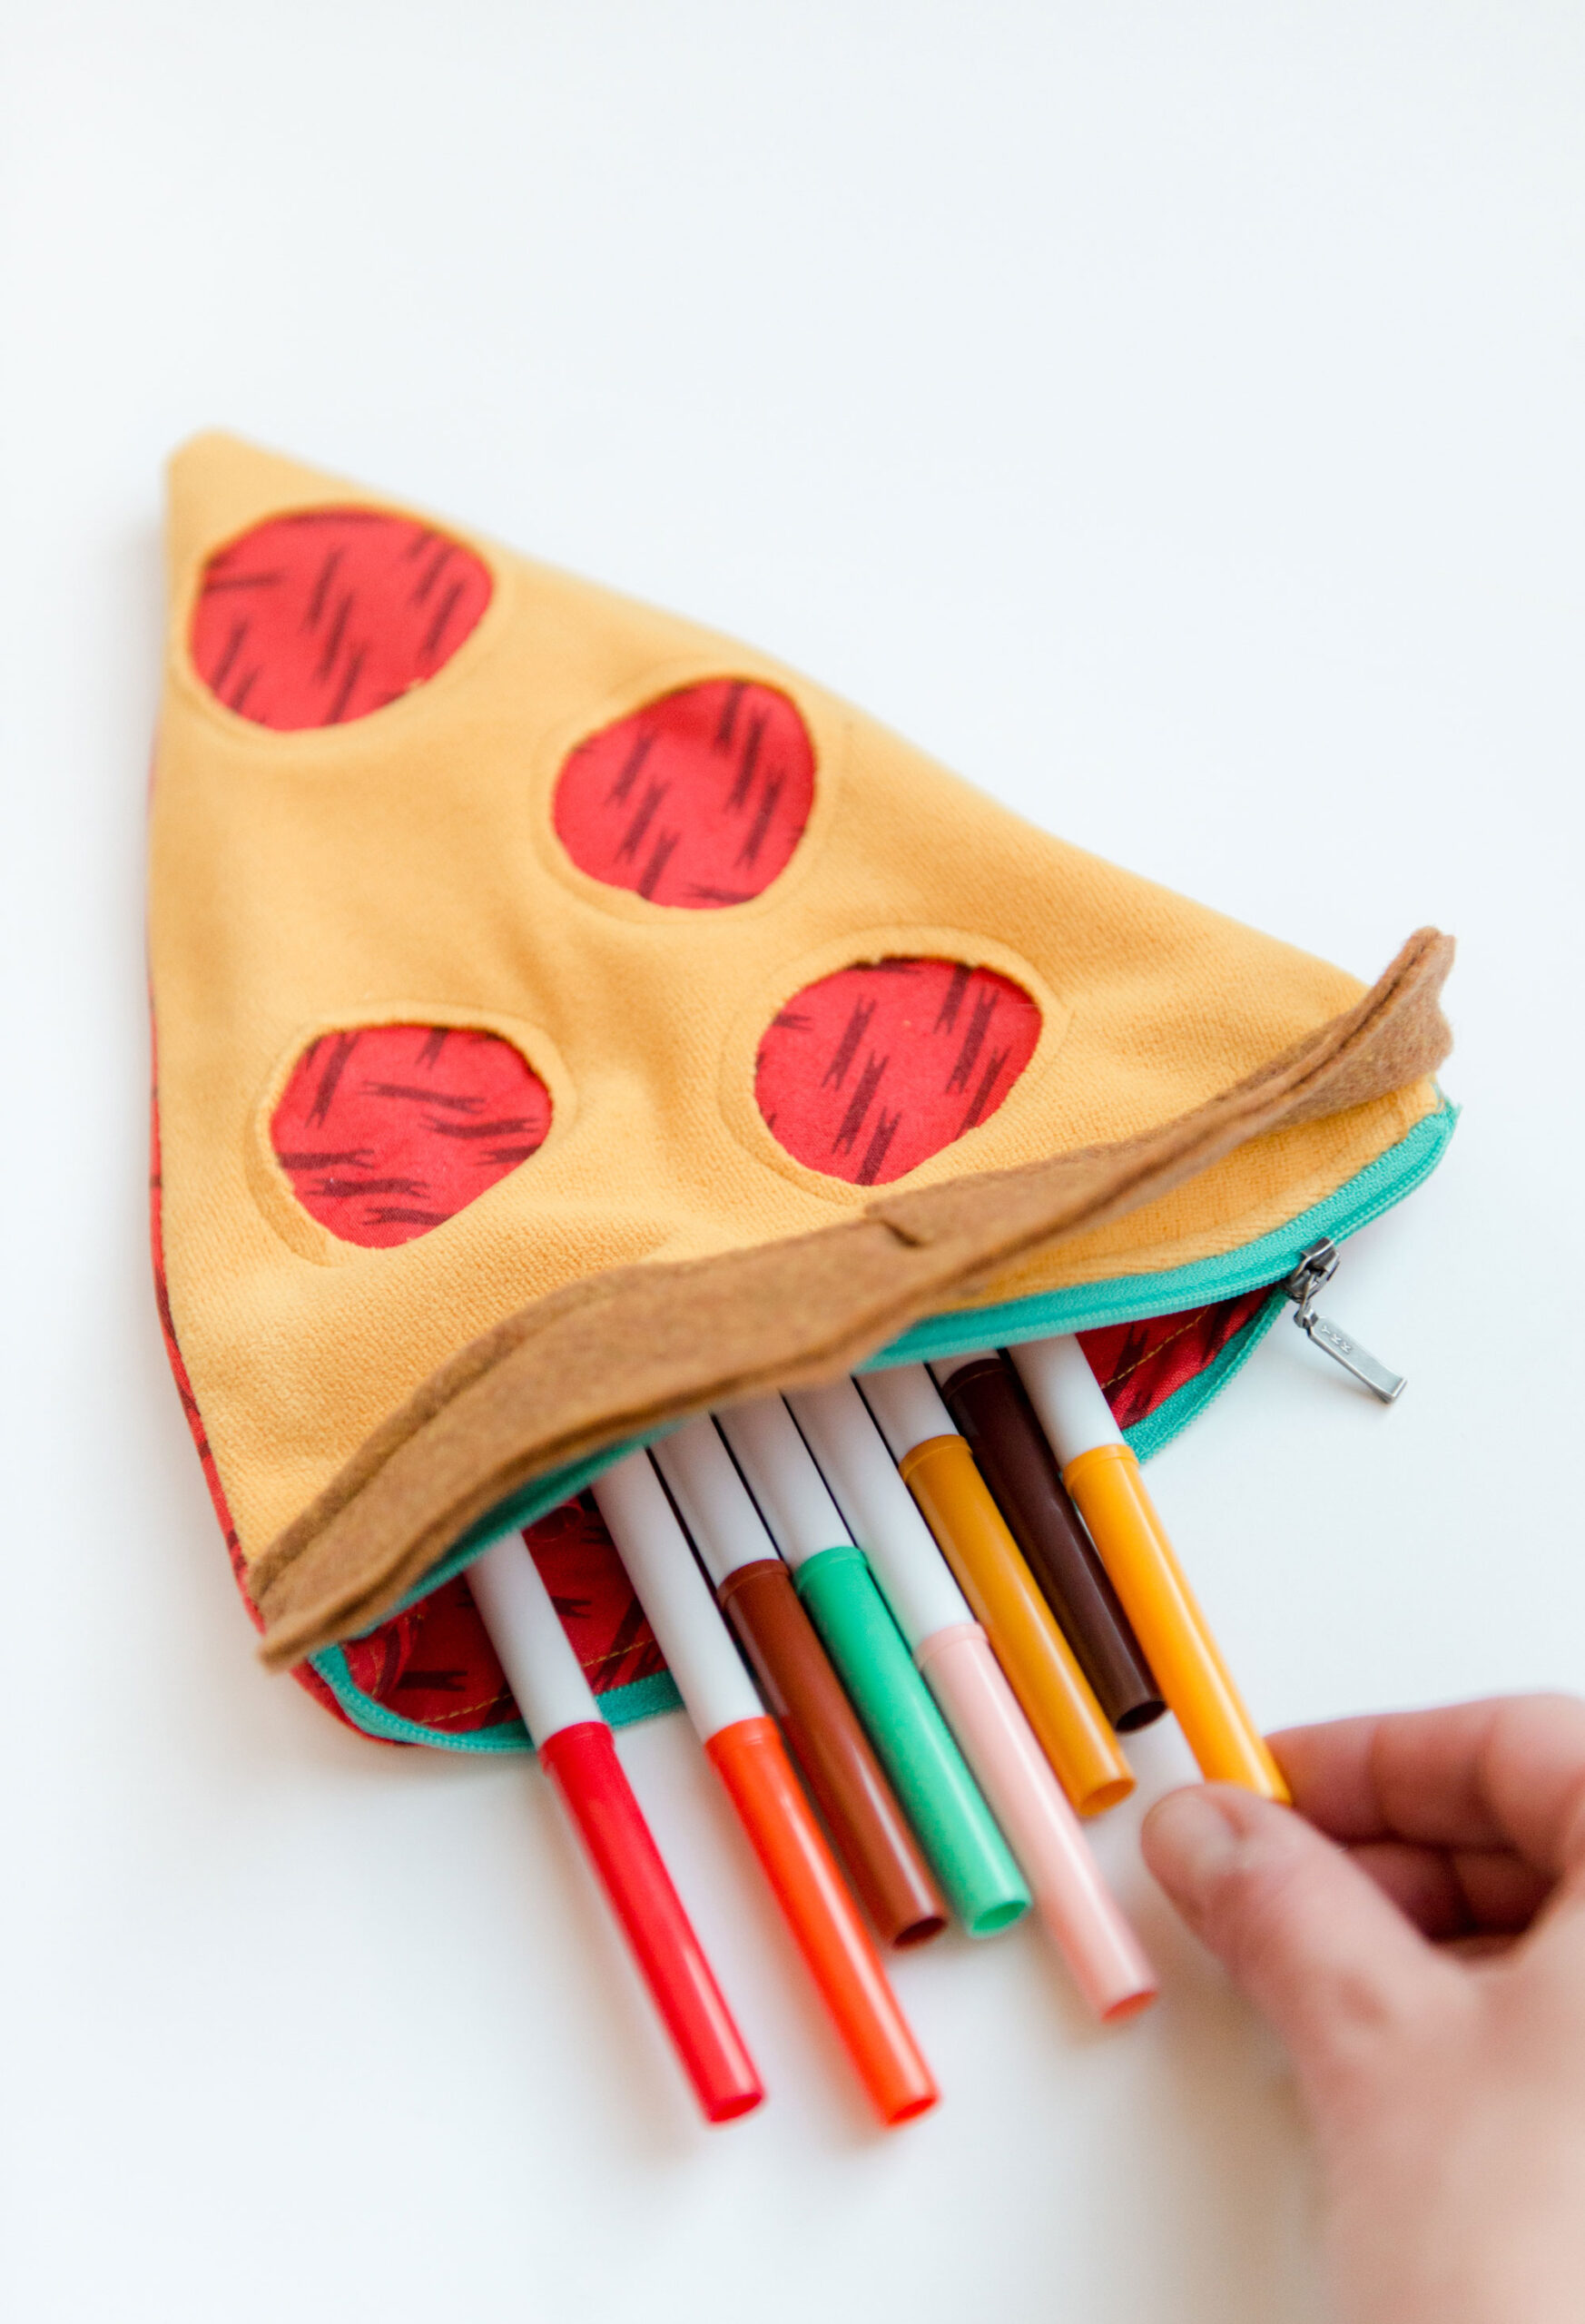 How to make a pizza pouch, how to sew a pizza pouch, pizza pouch DIY, janome sewing, sewing pattern, free sewing pattern, how to sew a zipper pouch